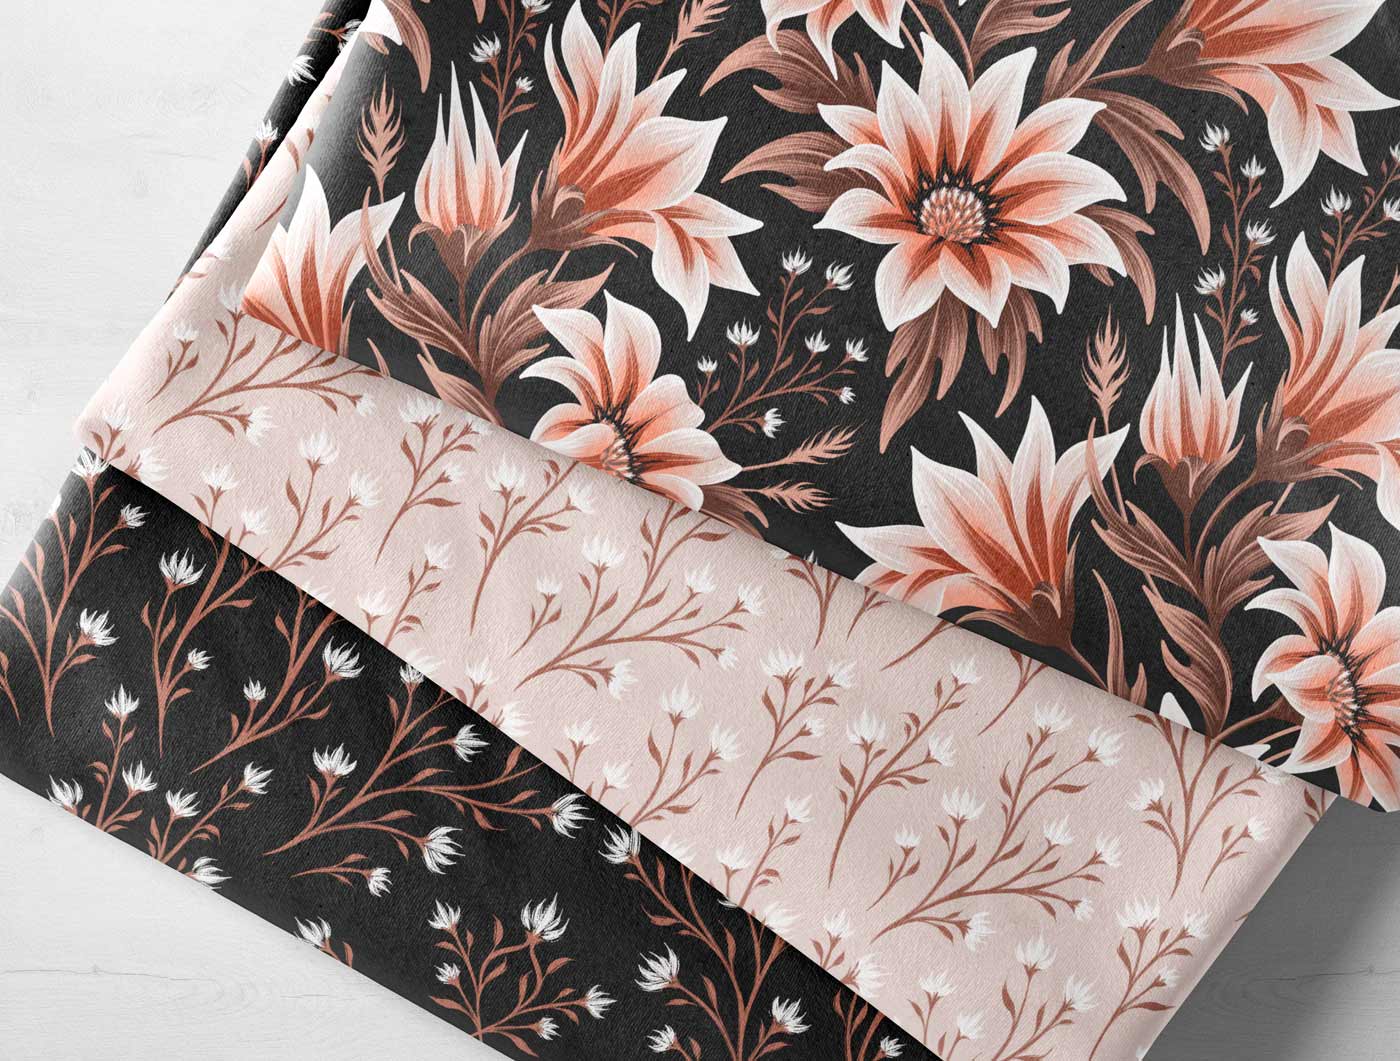 Three coordinating gazania floral fabrics in black and beige by Andrea Muller